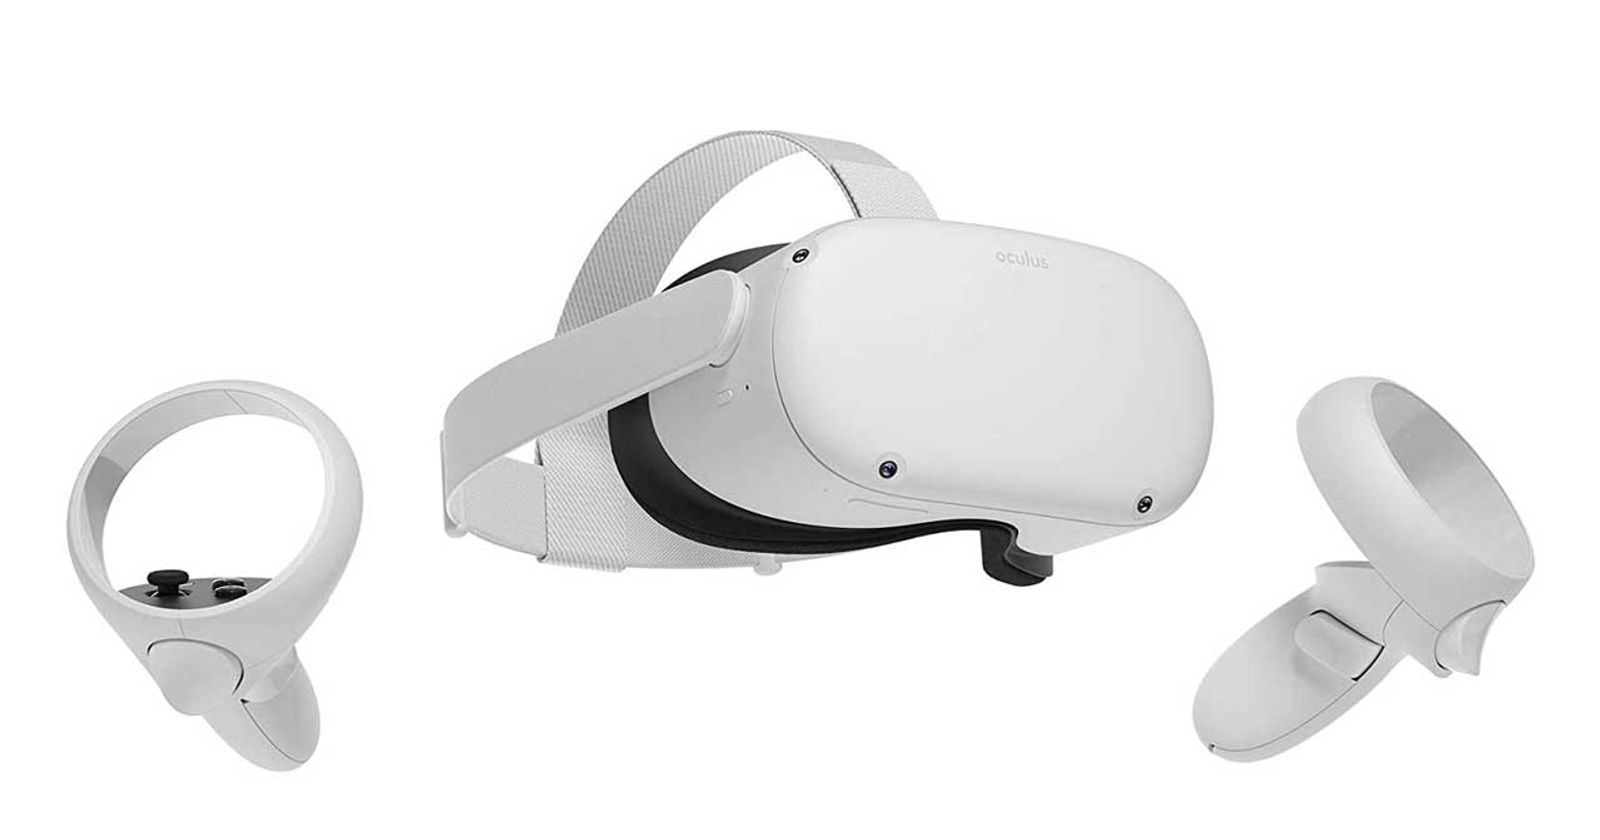 Meta Quest 3 vs. PSVR 2: Which is the best VR headset?